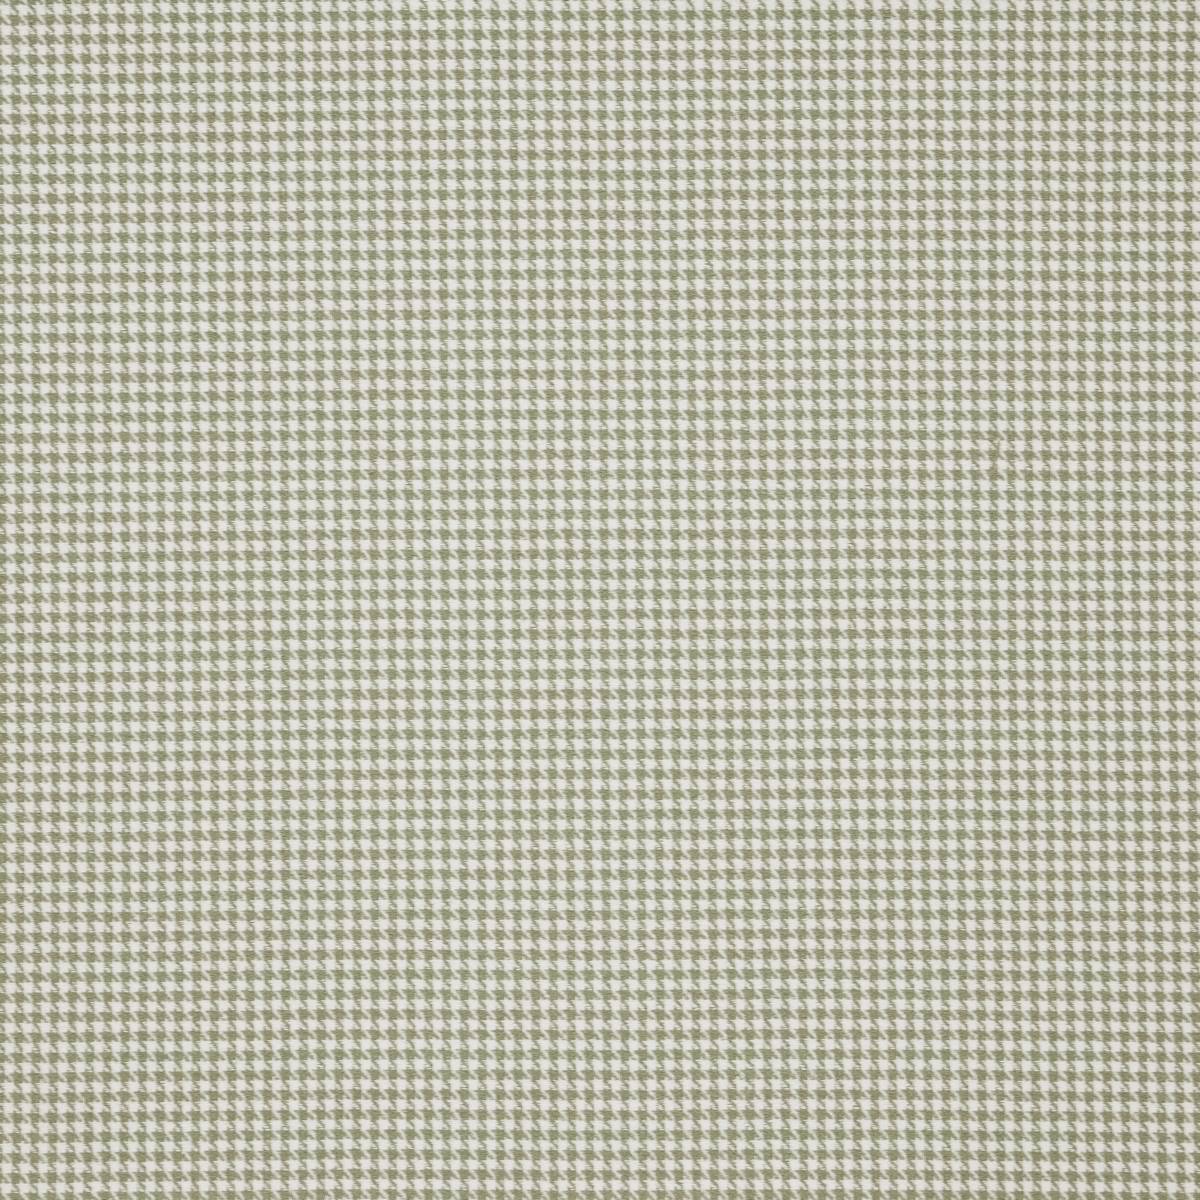 Houndstooth Olive Fabric by iLiv